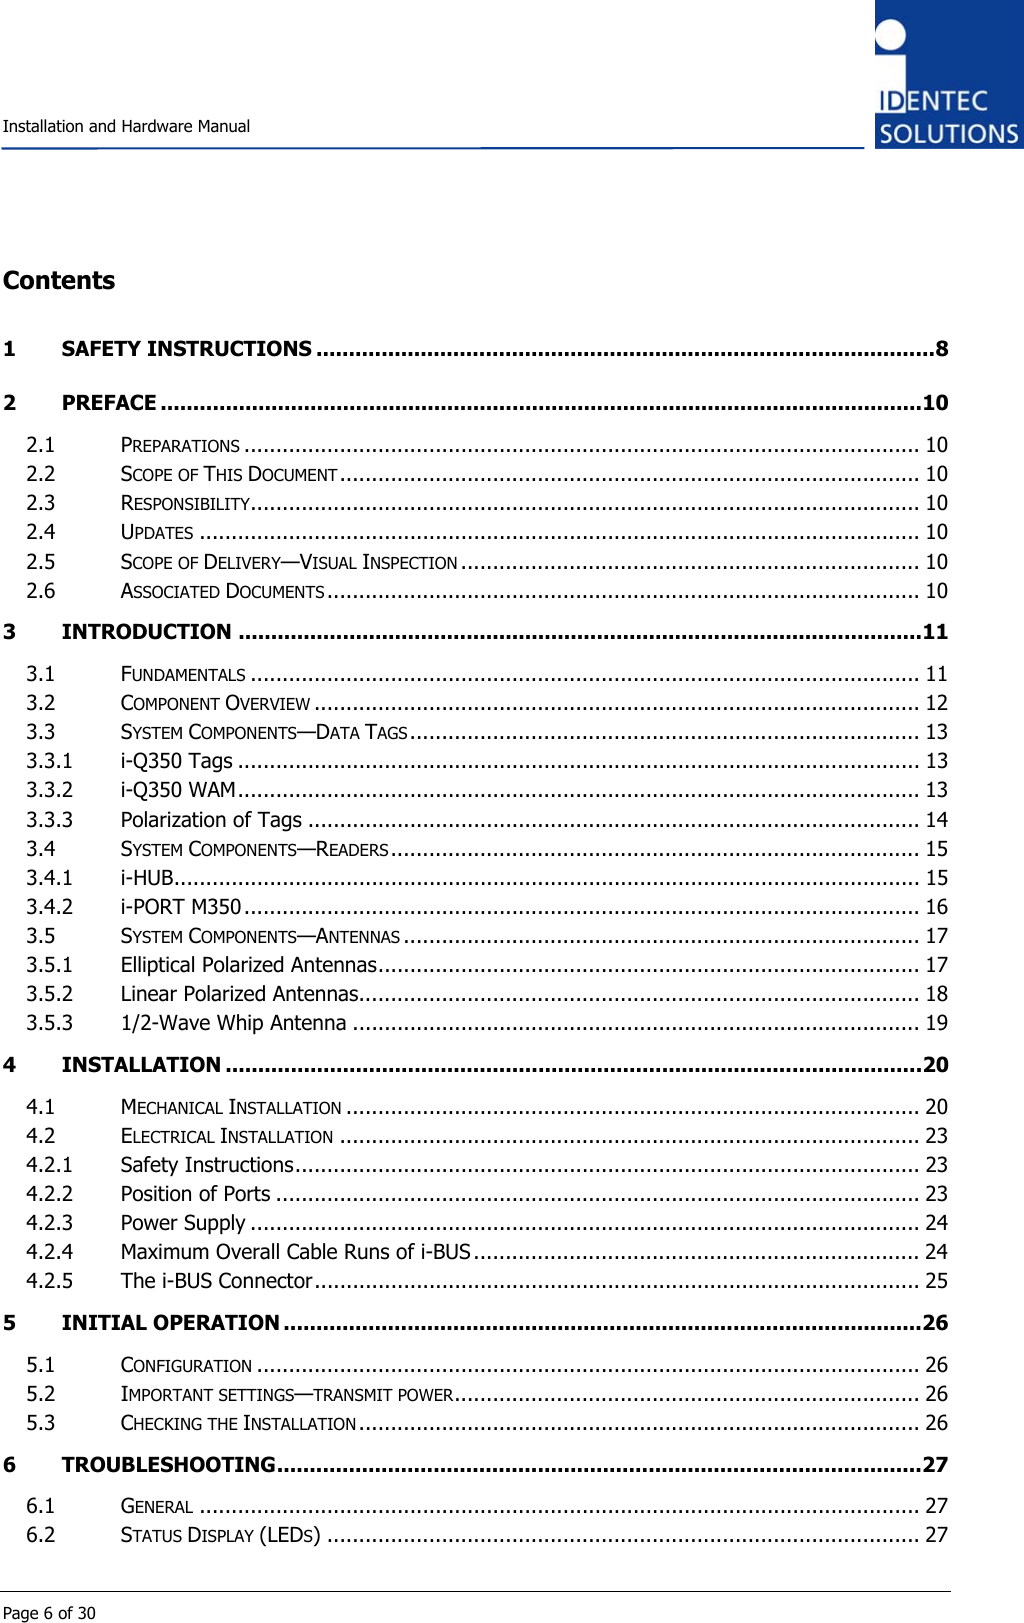    Installation and Hardware Manual  Page 6 of 30 Contents 1 SAFETY INSTRUCTIONS ...............................................................................................8 2 PREFACE .....................................................................................................................10 2.1 PREPARATIONS .......................................................................................................... 10 2.2 SCOPE OF THIS DOCUMENT........................................................................................... 10 2.3 RESPONSIBILITY......................................................................................................... 10 2.4 UPDATES ................................................................................................................. 10 2.5 SCOPE OF DELIVERY—VISUAL INSPECTION ........................................................................ 10 2.6 ASSOCIATED DOCUMENTS ............................................................................................. 10 3 INTRODUCTION .........................................................................................................11 3.1 FUNDAMENTALS ......................................................................................................... 11 3.2 COMPONENT OVERVIEW ............................................................................................... 12 3.3 SYSTEM COMPONENTS—DATA TAGS................................................................................ 13 3.3.1 i-Q350 Tags ........................................................................................................... 13 3.3.2 i-Q350 WAM........................................................................................................... 13 3.3.3 Polarization of Tags ................................................................................................ 14 3.4 SYSTEM COMPONENTS—READERS................................................................................... 15 3.4.1 i-HUB..................................................................................................................... 15 3.4.2 i-PORT M350.......................................................................................................... 16 3.5 SYSTEM COMPONENTS—ANTENNAS ................................................................................. 17 3.5.1 Elliptical Polarized Antennas..................................................................................... 17 3.5.2 Linear Polarized Antennas........................................................................................ 18 3.5.3 1/2-Wave Whip Antenna ......................................................................................... 19 4 INSTALLATION ...........................................................................................................20 4.1 MECHANICAL INSTALLATION .......................................................................................... 20 4.2 ELECTRICAL INSTALLATION ........................................................................................... 23 4.2.1 Safety Instructions.................................................................................................. 23 4.2.2 Position of Ports ..................................................................................................... 23 4.2.3 Power Supply ......................................................................................................... 24 4.2.4 Maximum Overall Cable Runs of i-BUS ...................................................................... 24 4.2.5 The i-BUS Connector............................................................................................... 25 5 INITIAL OPERATION ..................................................................................................26 5.1 CONFIGURATION ........................................................................................................ 26 5.2 IMPORTANT SETTINGS—TRANSMIT POWER......................................................................... 26 5.3 CHECKING THE INSTALLATION ........................................................................................ 26 6 TROUBLESHOOTING...................................................................................................27 6.1 GENERAL ................................................................................................................. 27 6.2 STATUS DISPLAY (LEDS) ............................................................................................. 27 